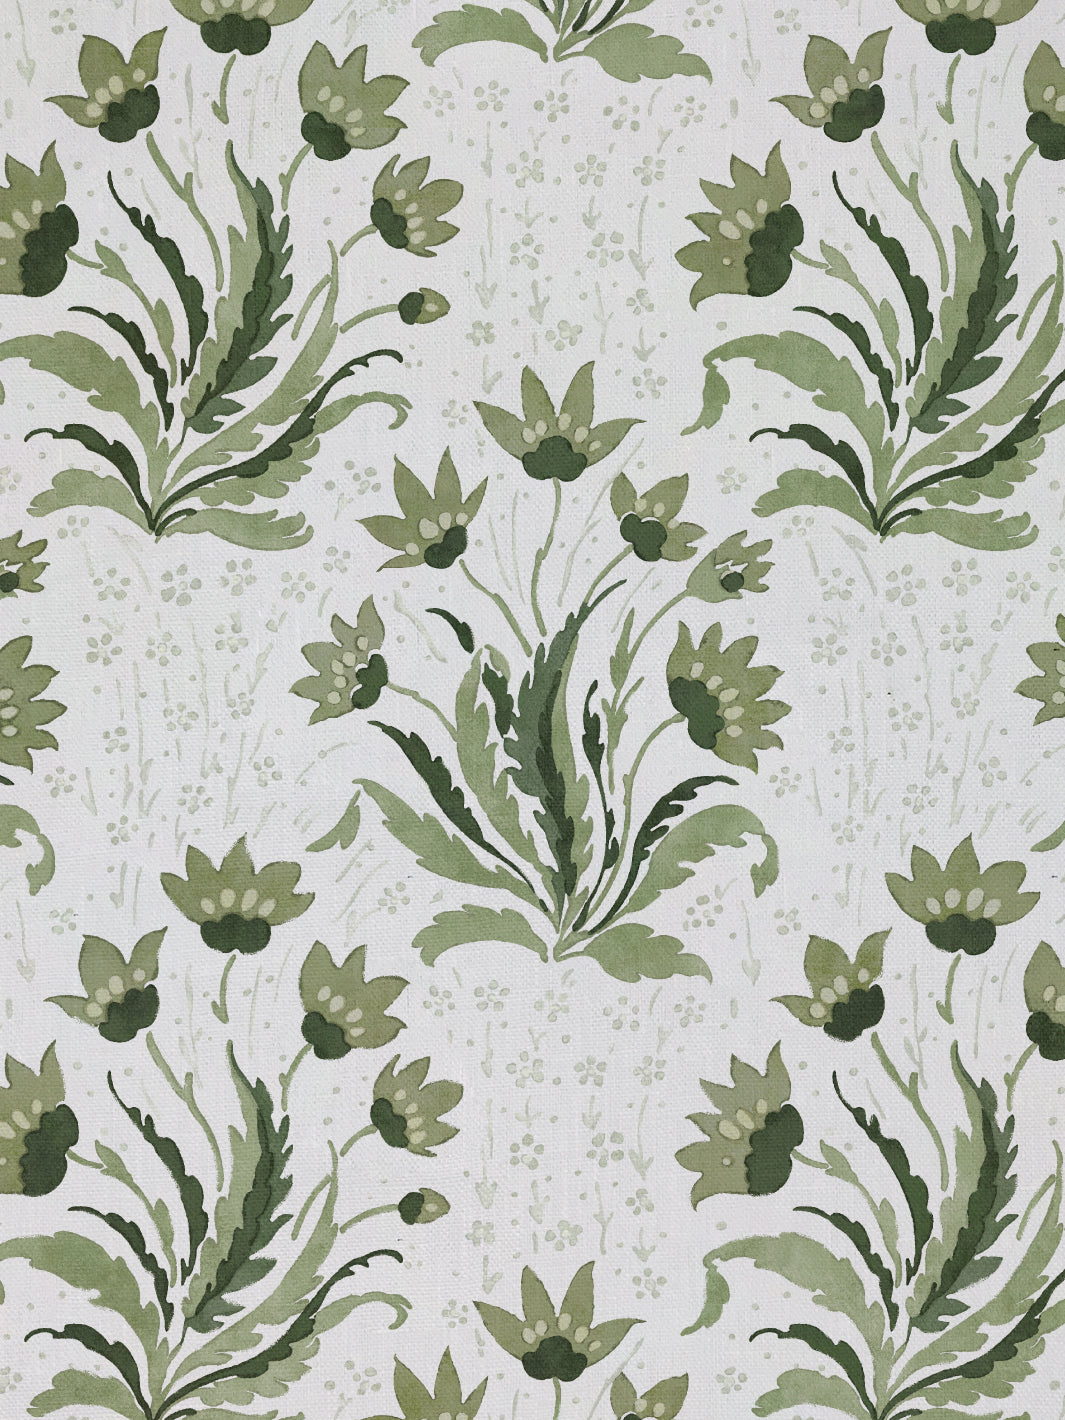 'Hillhouse Floral Tonal' Linen Fabric by Nathan Turner - Moss